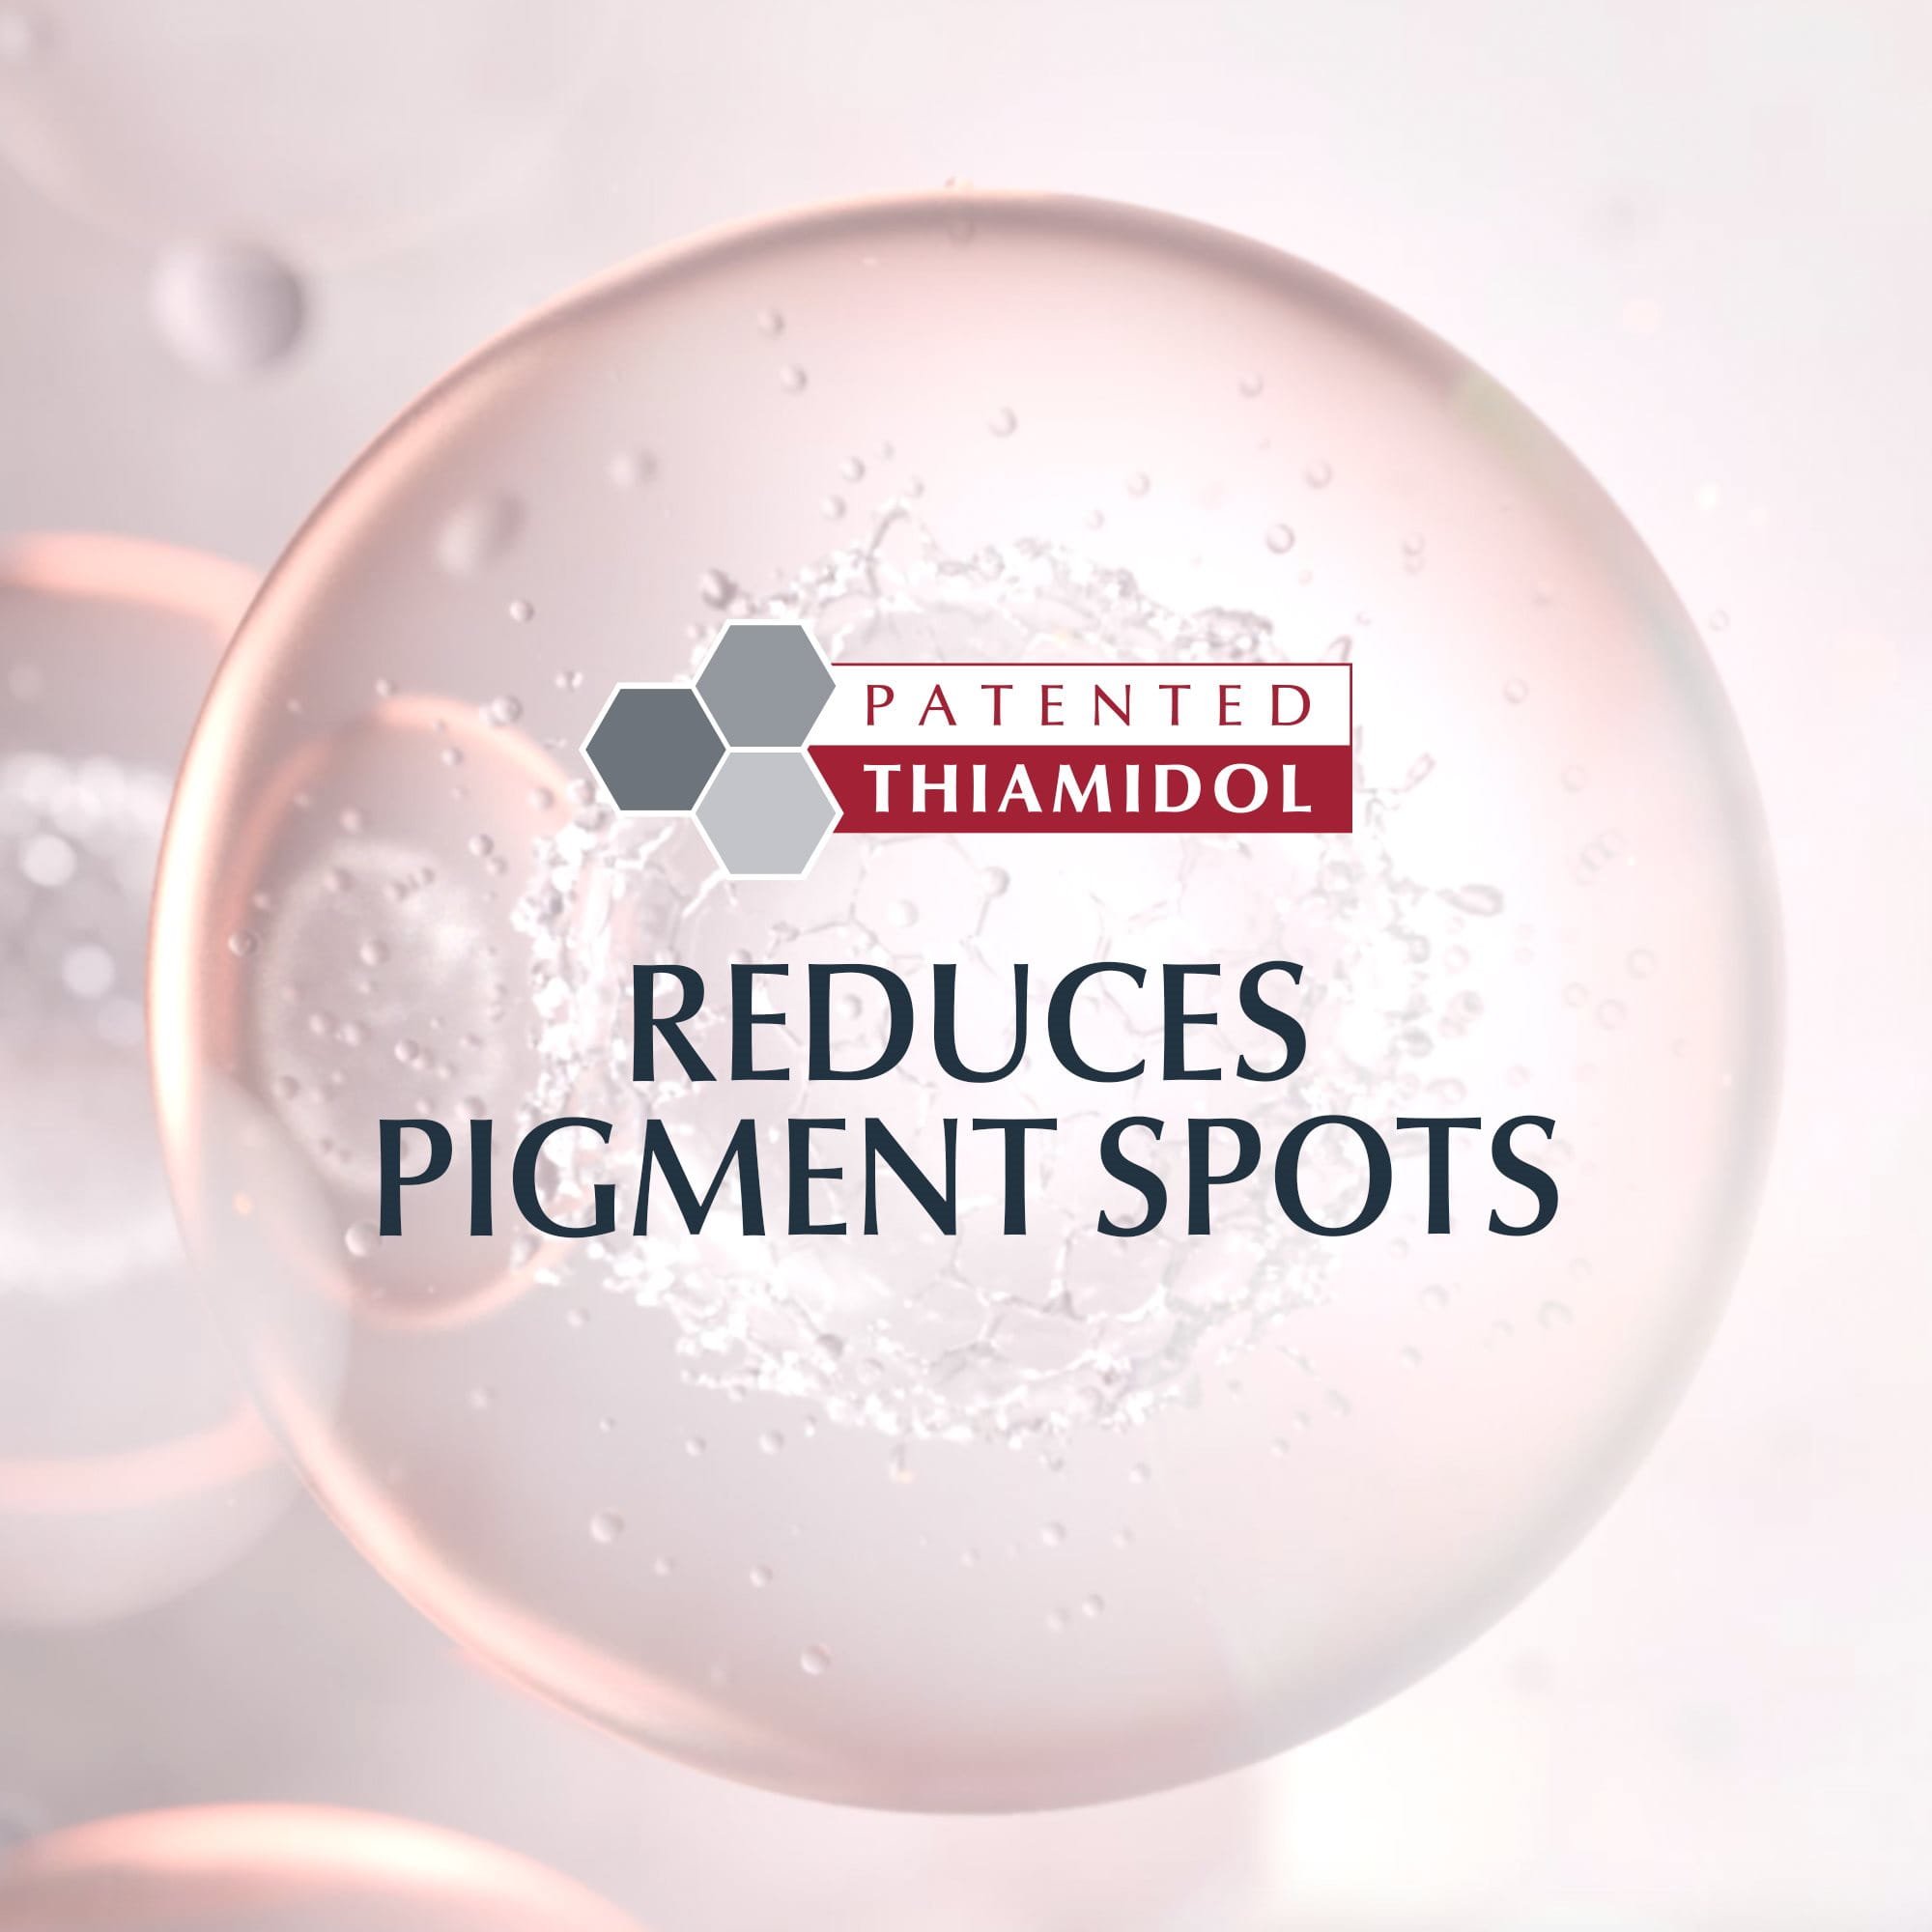 Patented Thiamidol reduces pigment spots